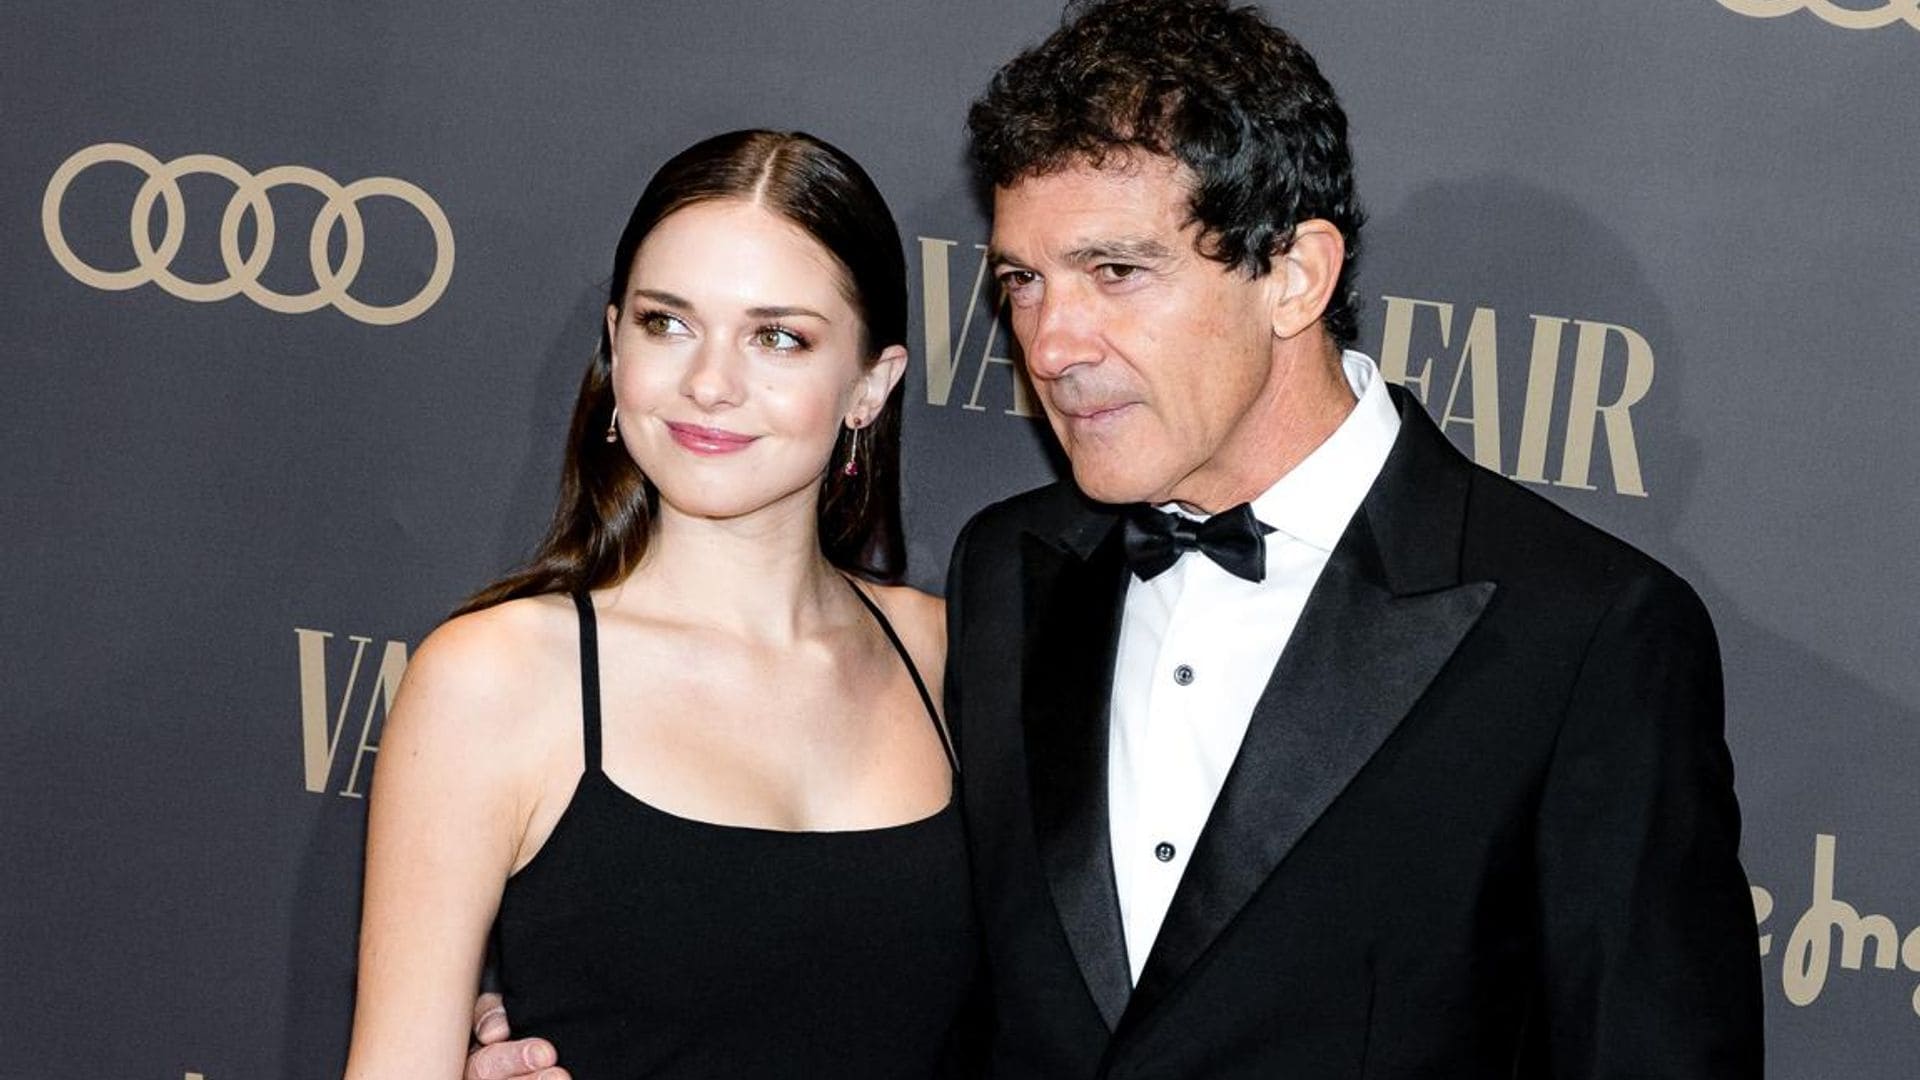 Paella, Pan con Tomate and more: Antonio Banderas’ daughter Stella pays homage to heritage with iconic dishes